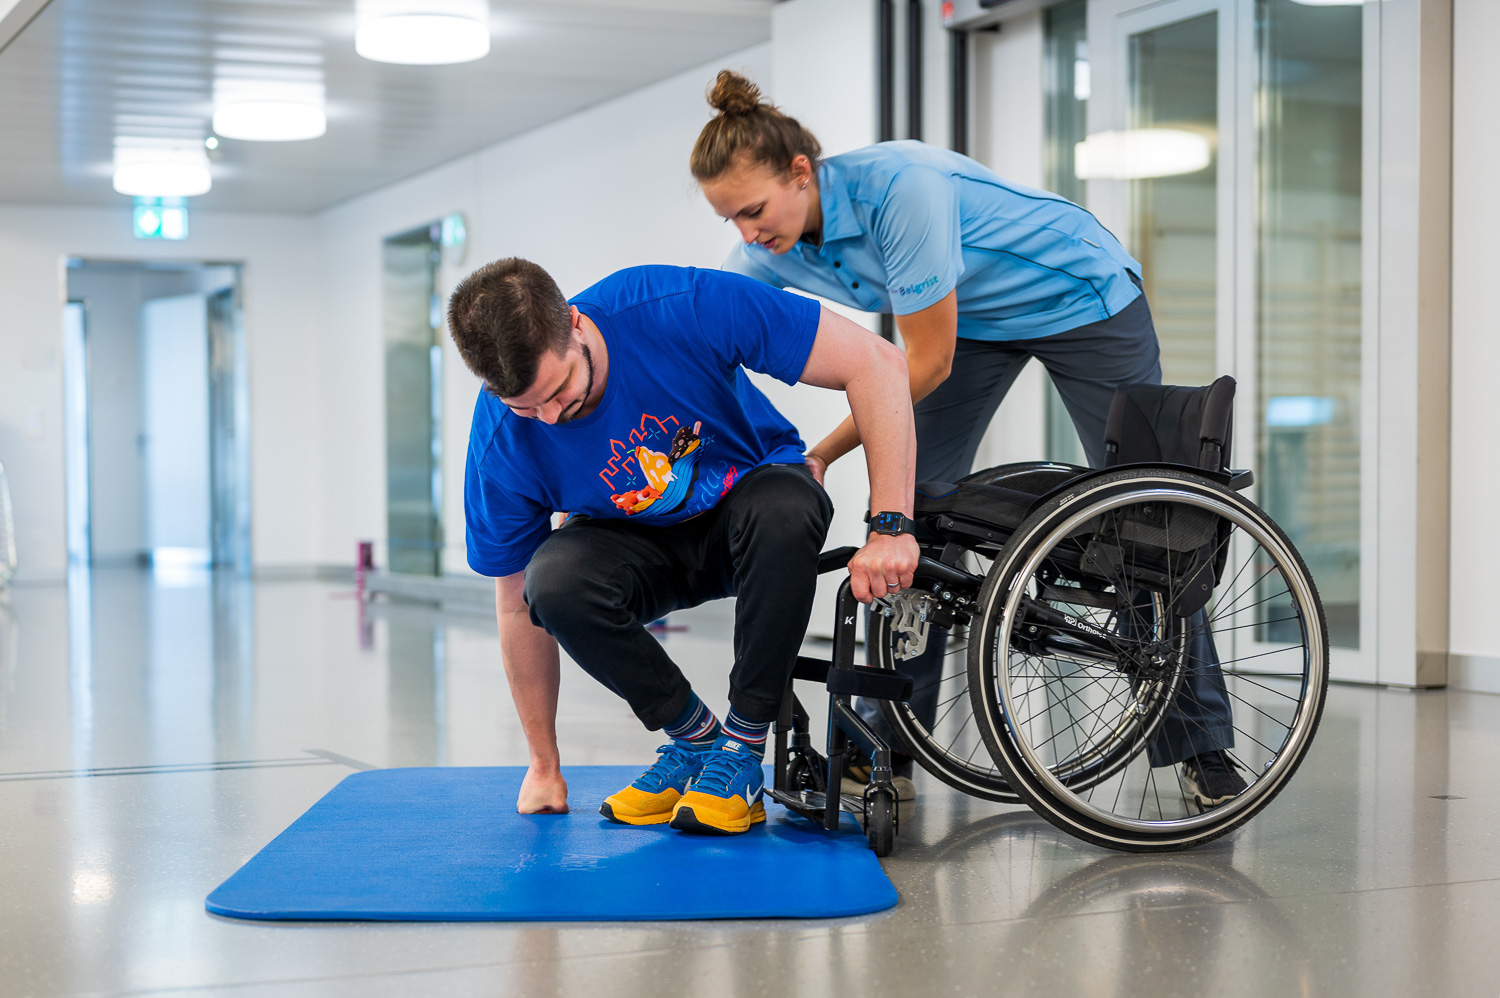 Paraplegic patient tries to get into the wheelchair backwards from a blue mat lying on the floor. The physiotherapist helps him and holds him by the pelvis.